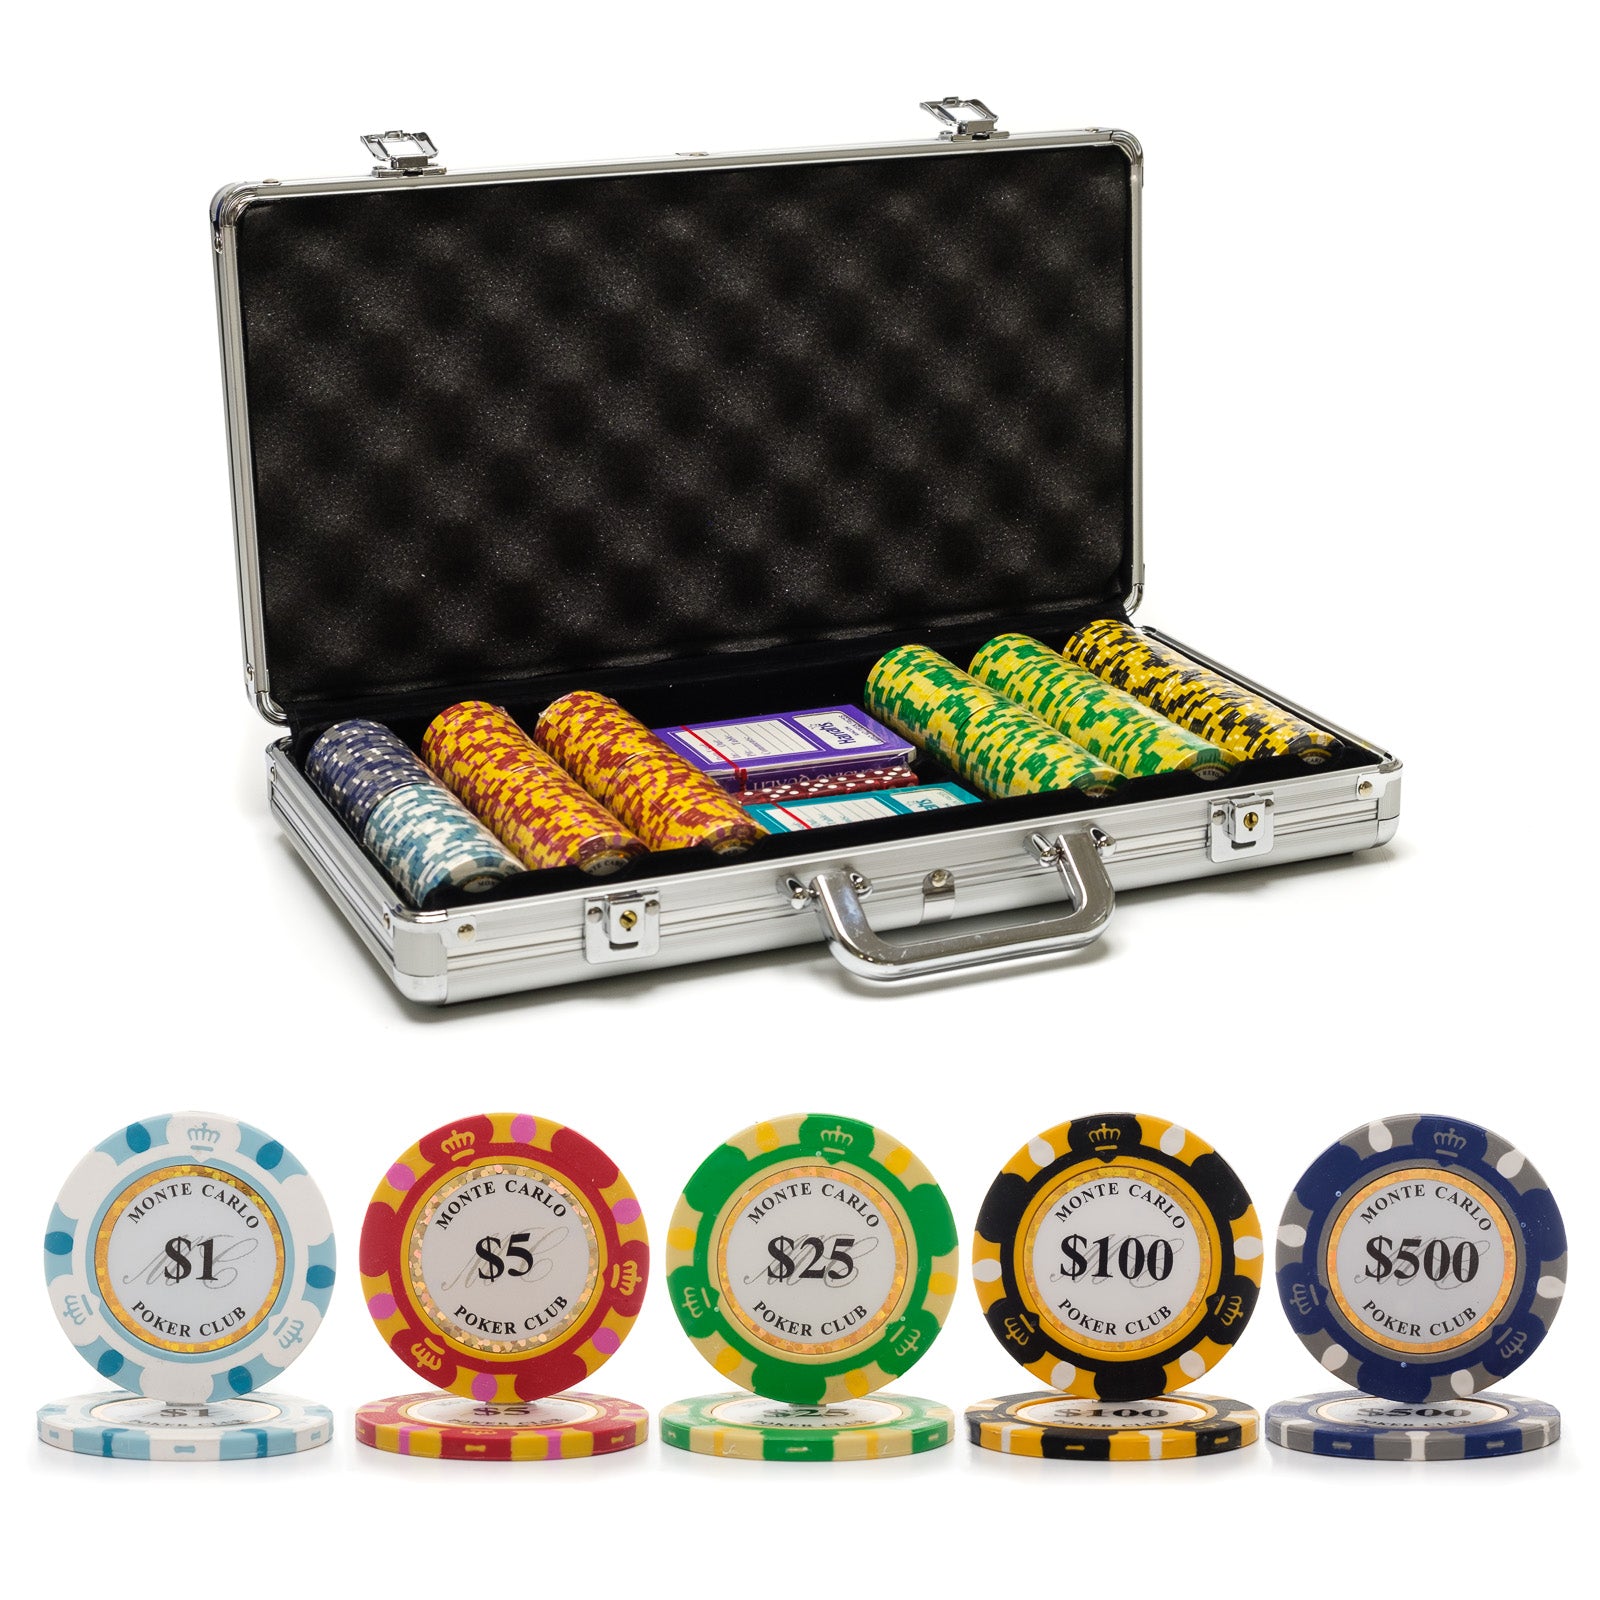 300 pc. 13.5g Monte Carlo Poker Chip Set with Aluminum Case